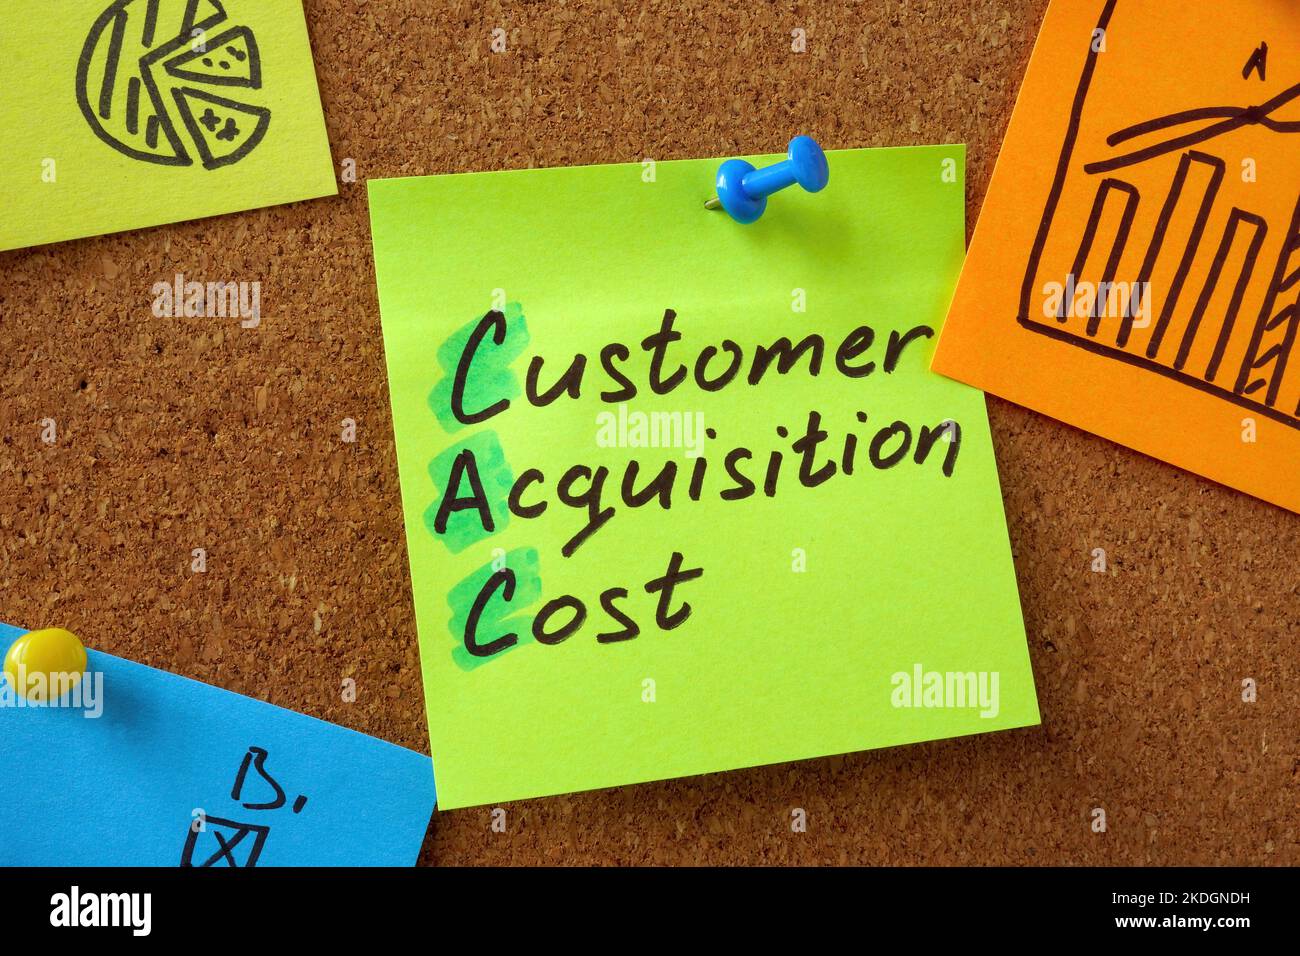 Board with pinned sticks about Customer Acquisition Cost. Stock Photo